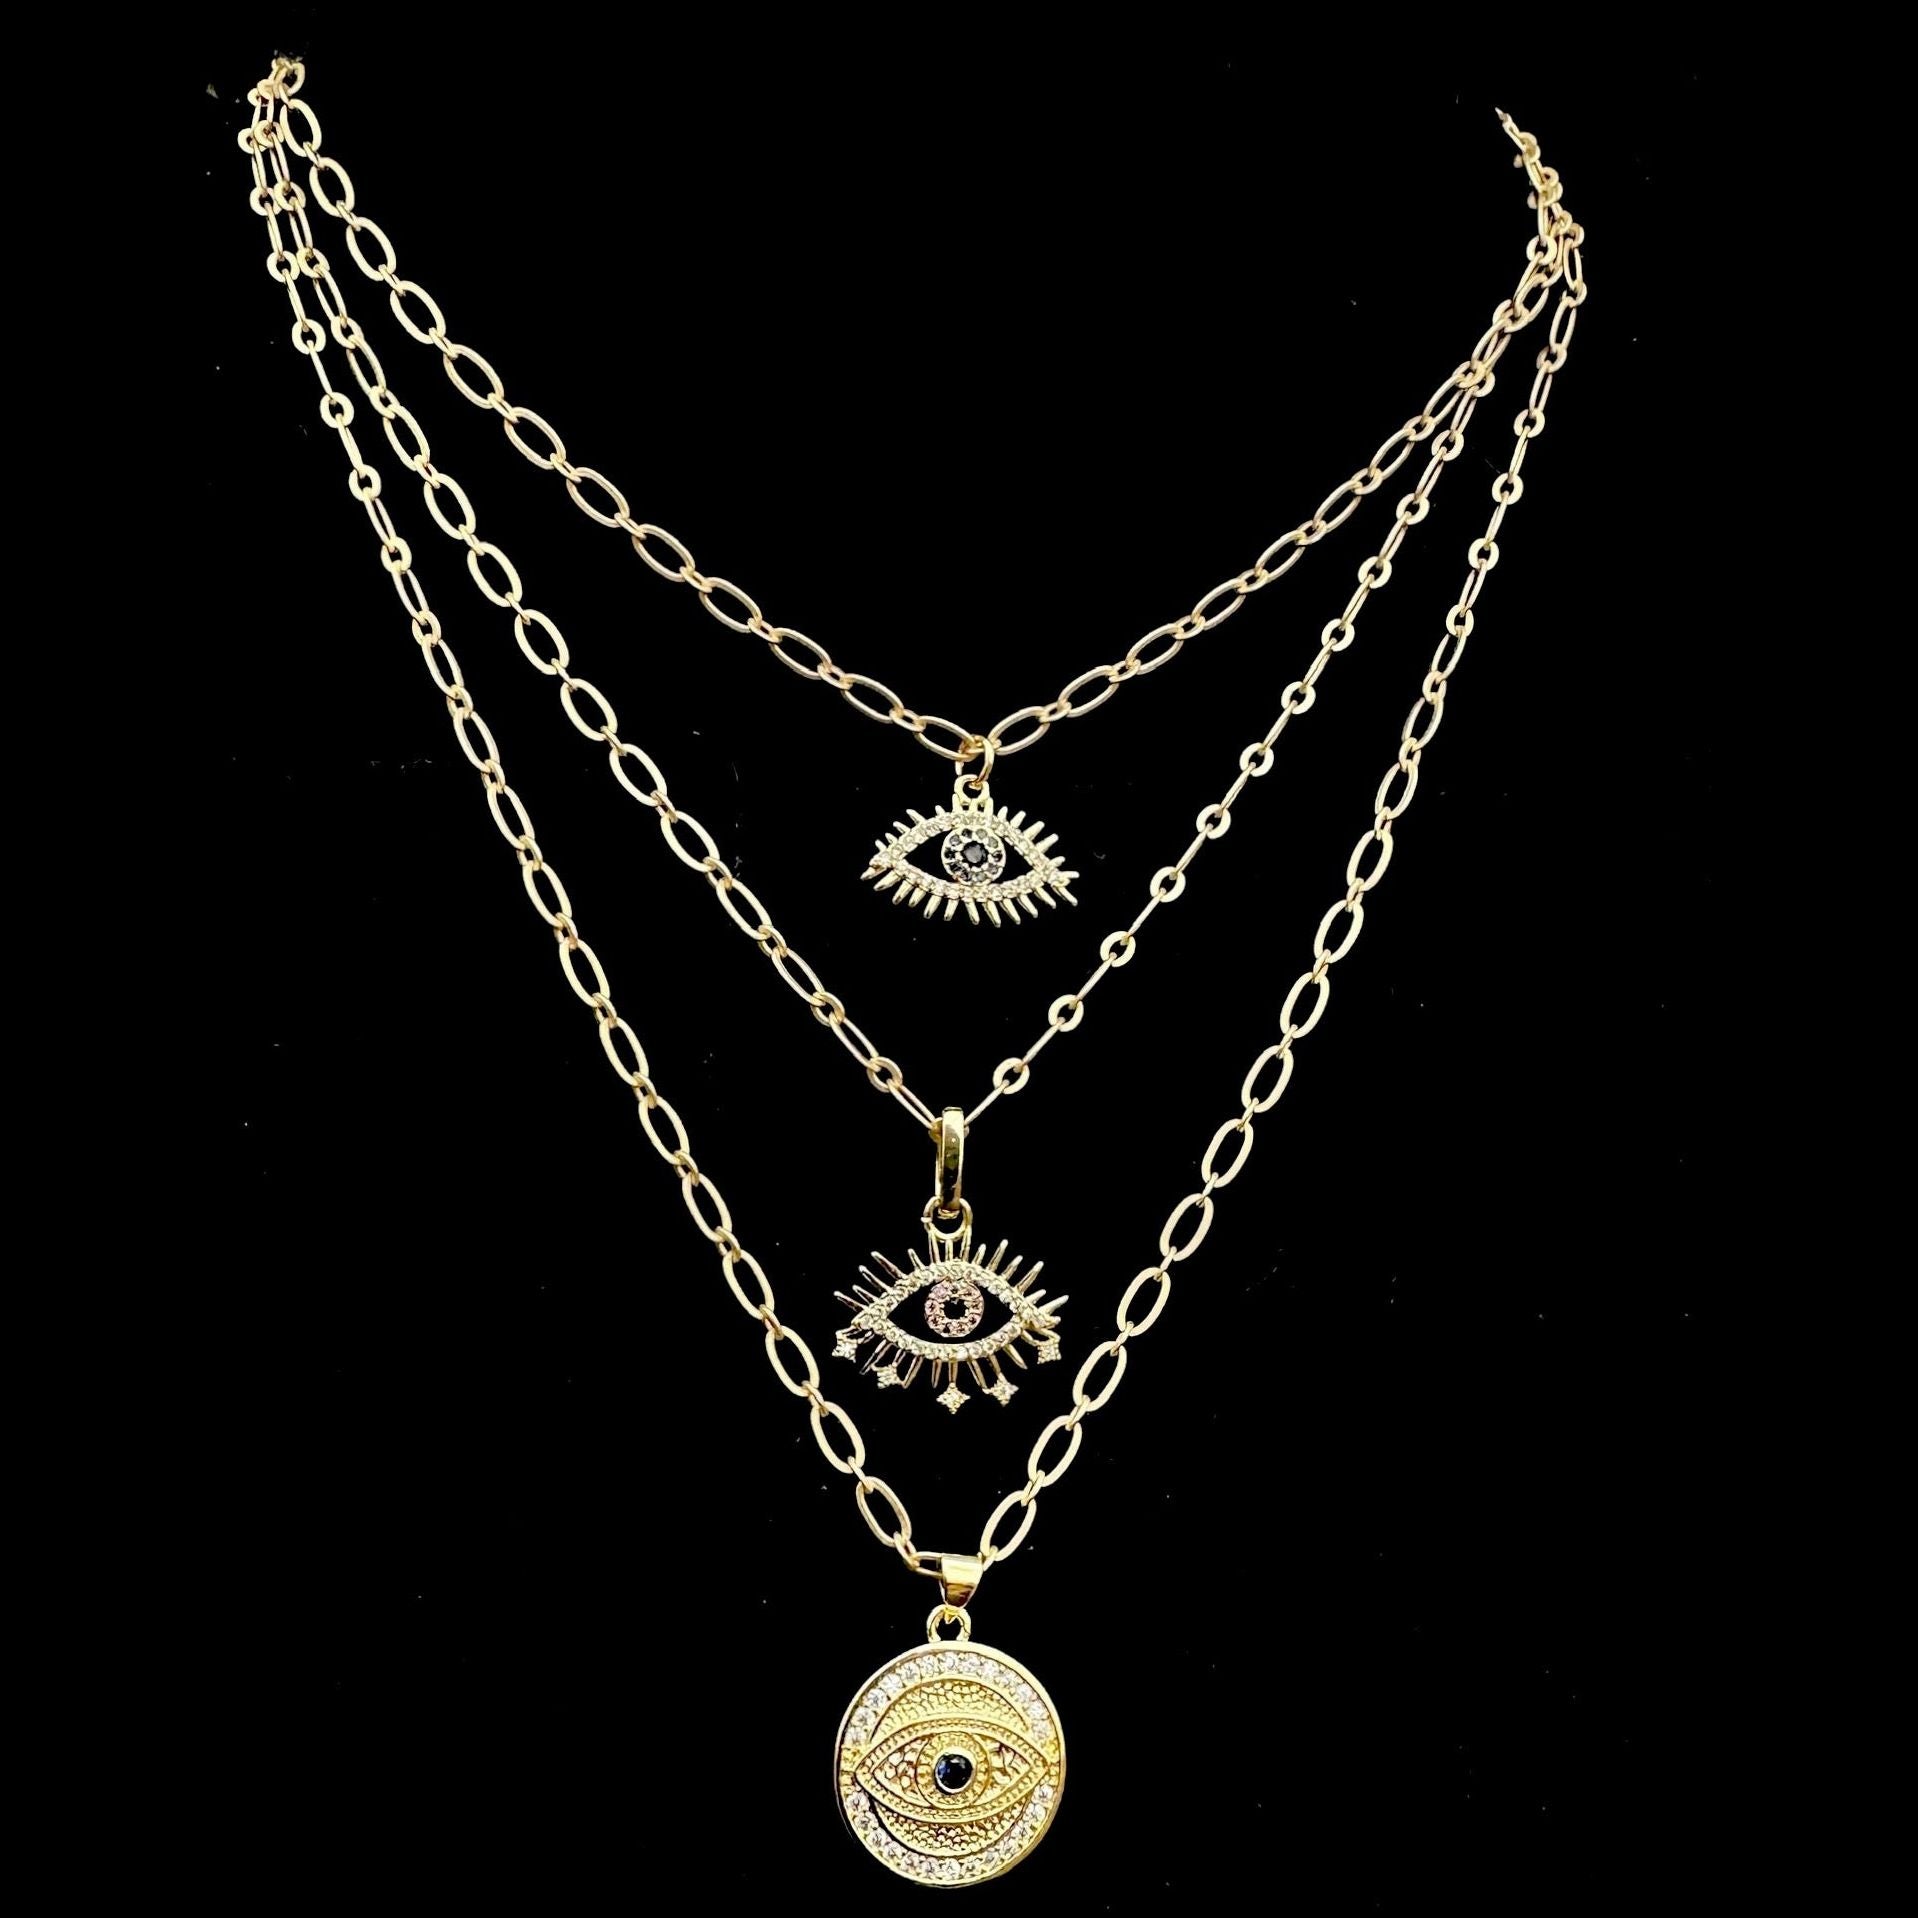 All Seeing Eye Wisdom Chain Necklace